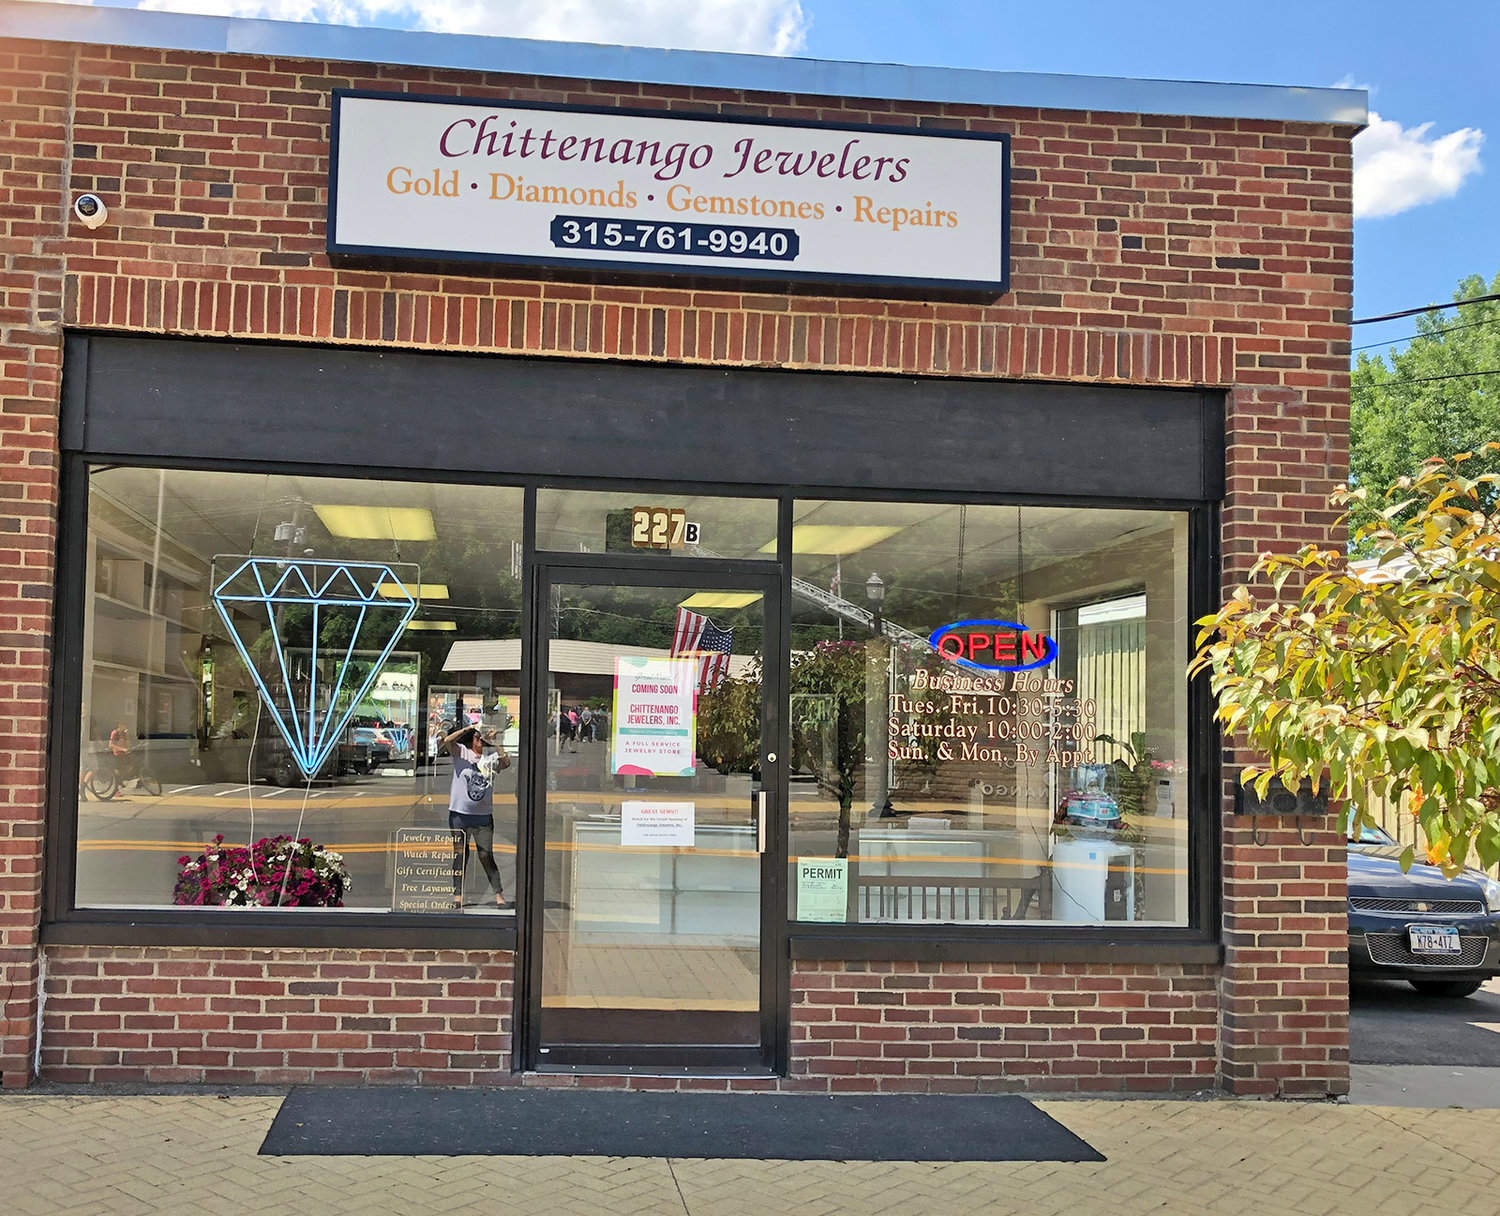 NOW OPEN — Chittenango Jewelers, 227B Genesee St., opened its doors for the first time at 10:30 this morning. The business is a joint venture of two industry professionals — Harvey Ullman and Paula Bojinoff.